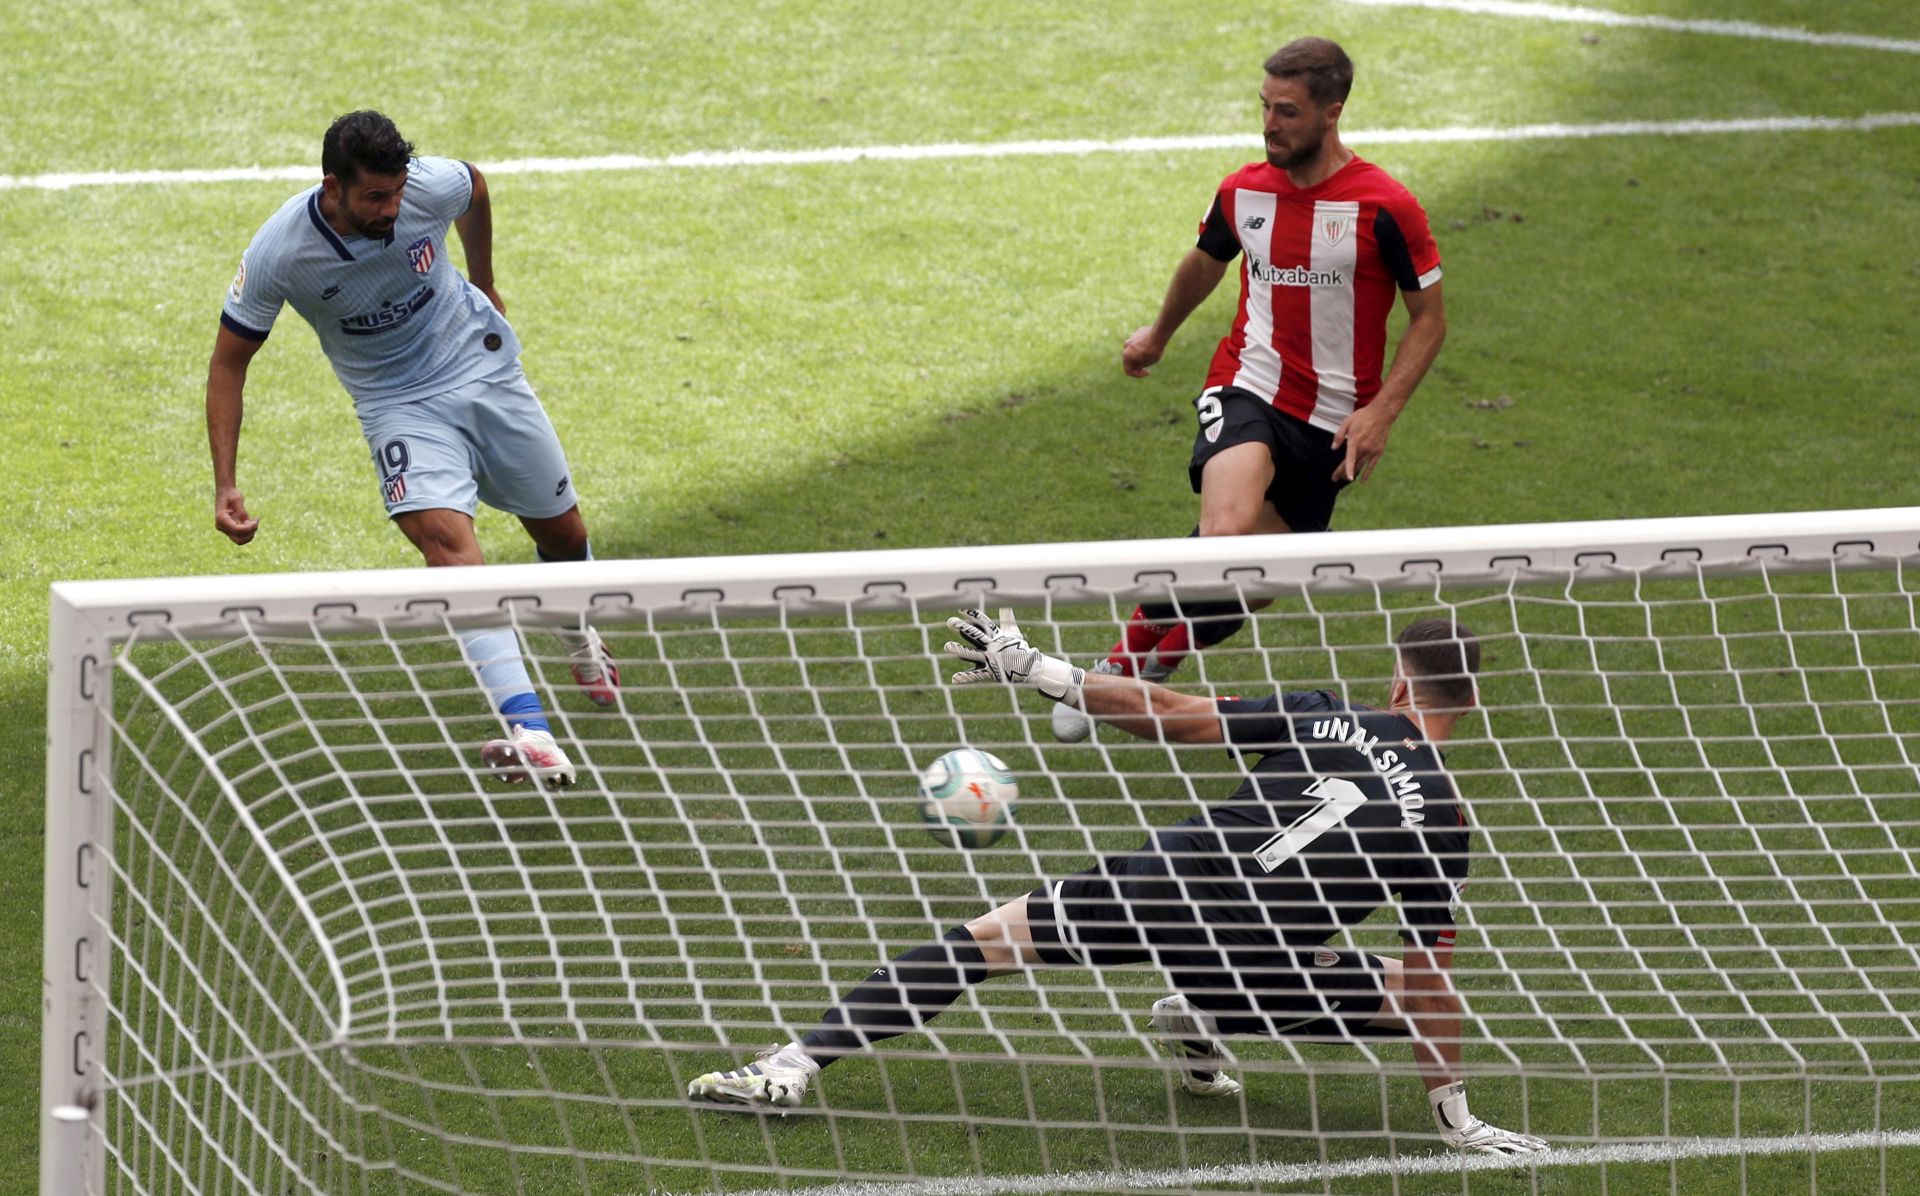 epa08484820 Atletico Madrid's forward Diego Costa (L) scores the equalizer against Athletic Bilbao's goalkeeper Unai Simon (R) during the LaLiga soccer match between Athletic Bilbao and Atletico Madrid, in Bilbao, Basque Country, northern Spain, 14 June 2020.  EPA/Luis Tejido